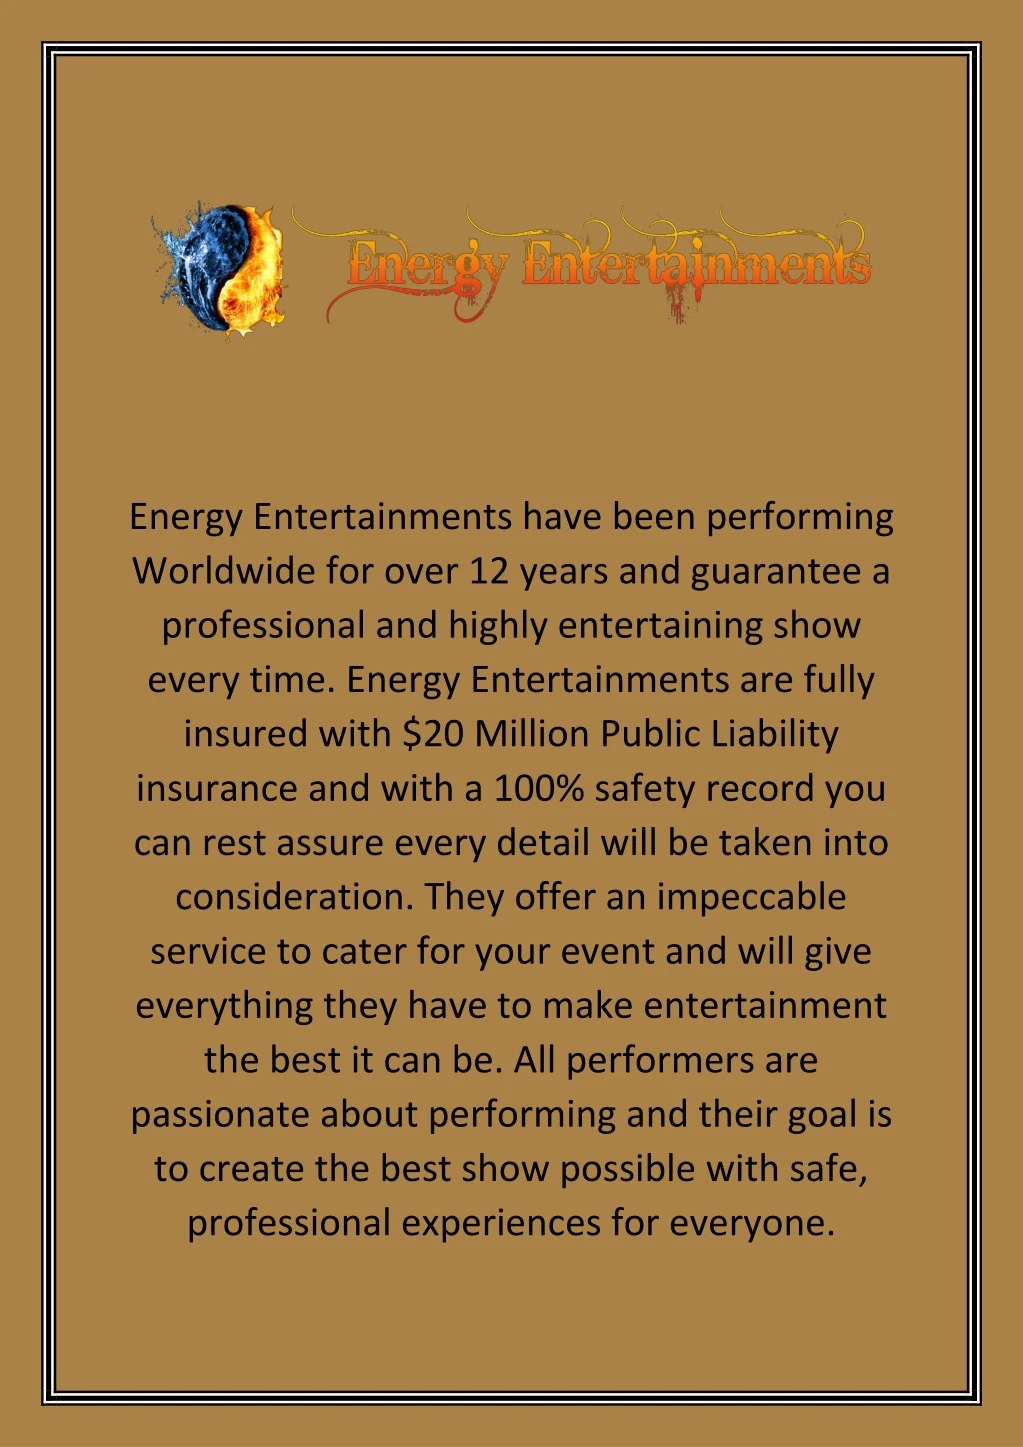 energy entertainments have been performing